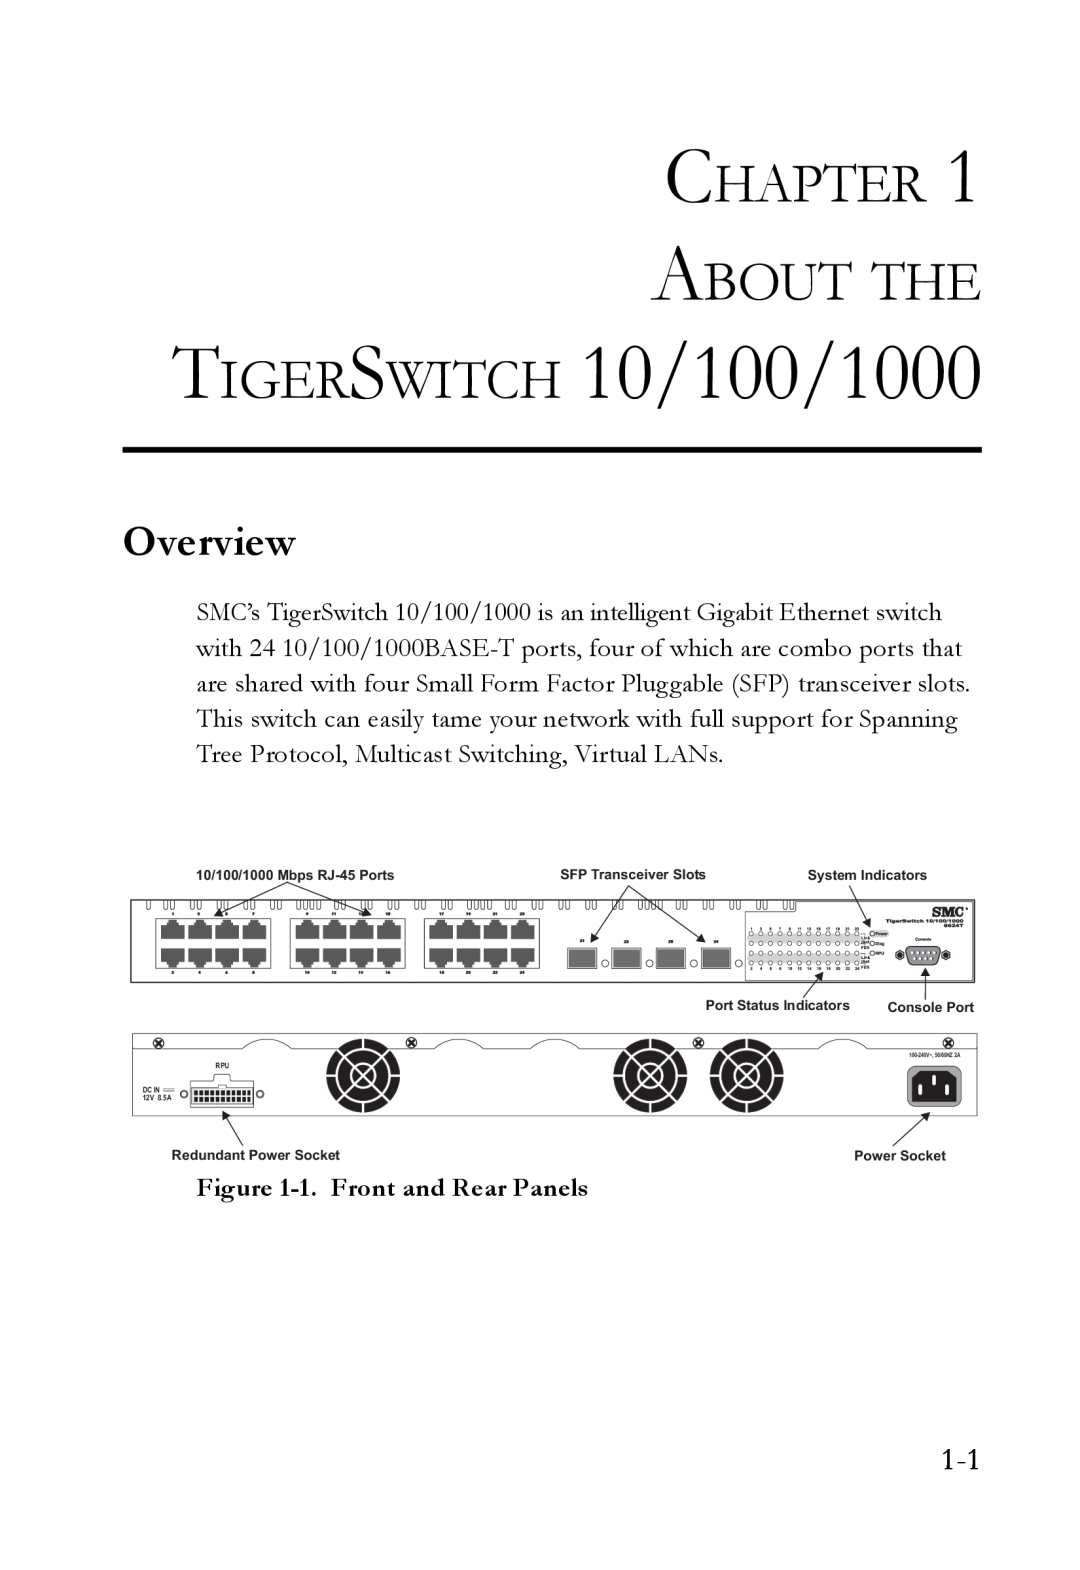 SMC Networks SMC8624T manual Chapter About The, Overview, TIGERSWITCH 10/100/1000, 1. Front and Rear Panels 